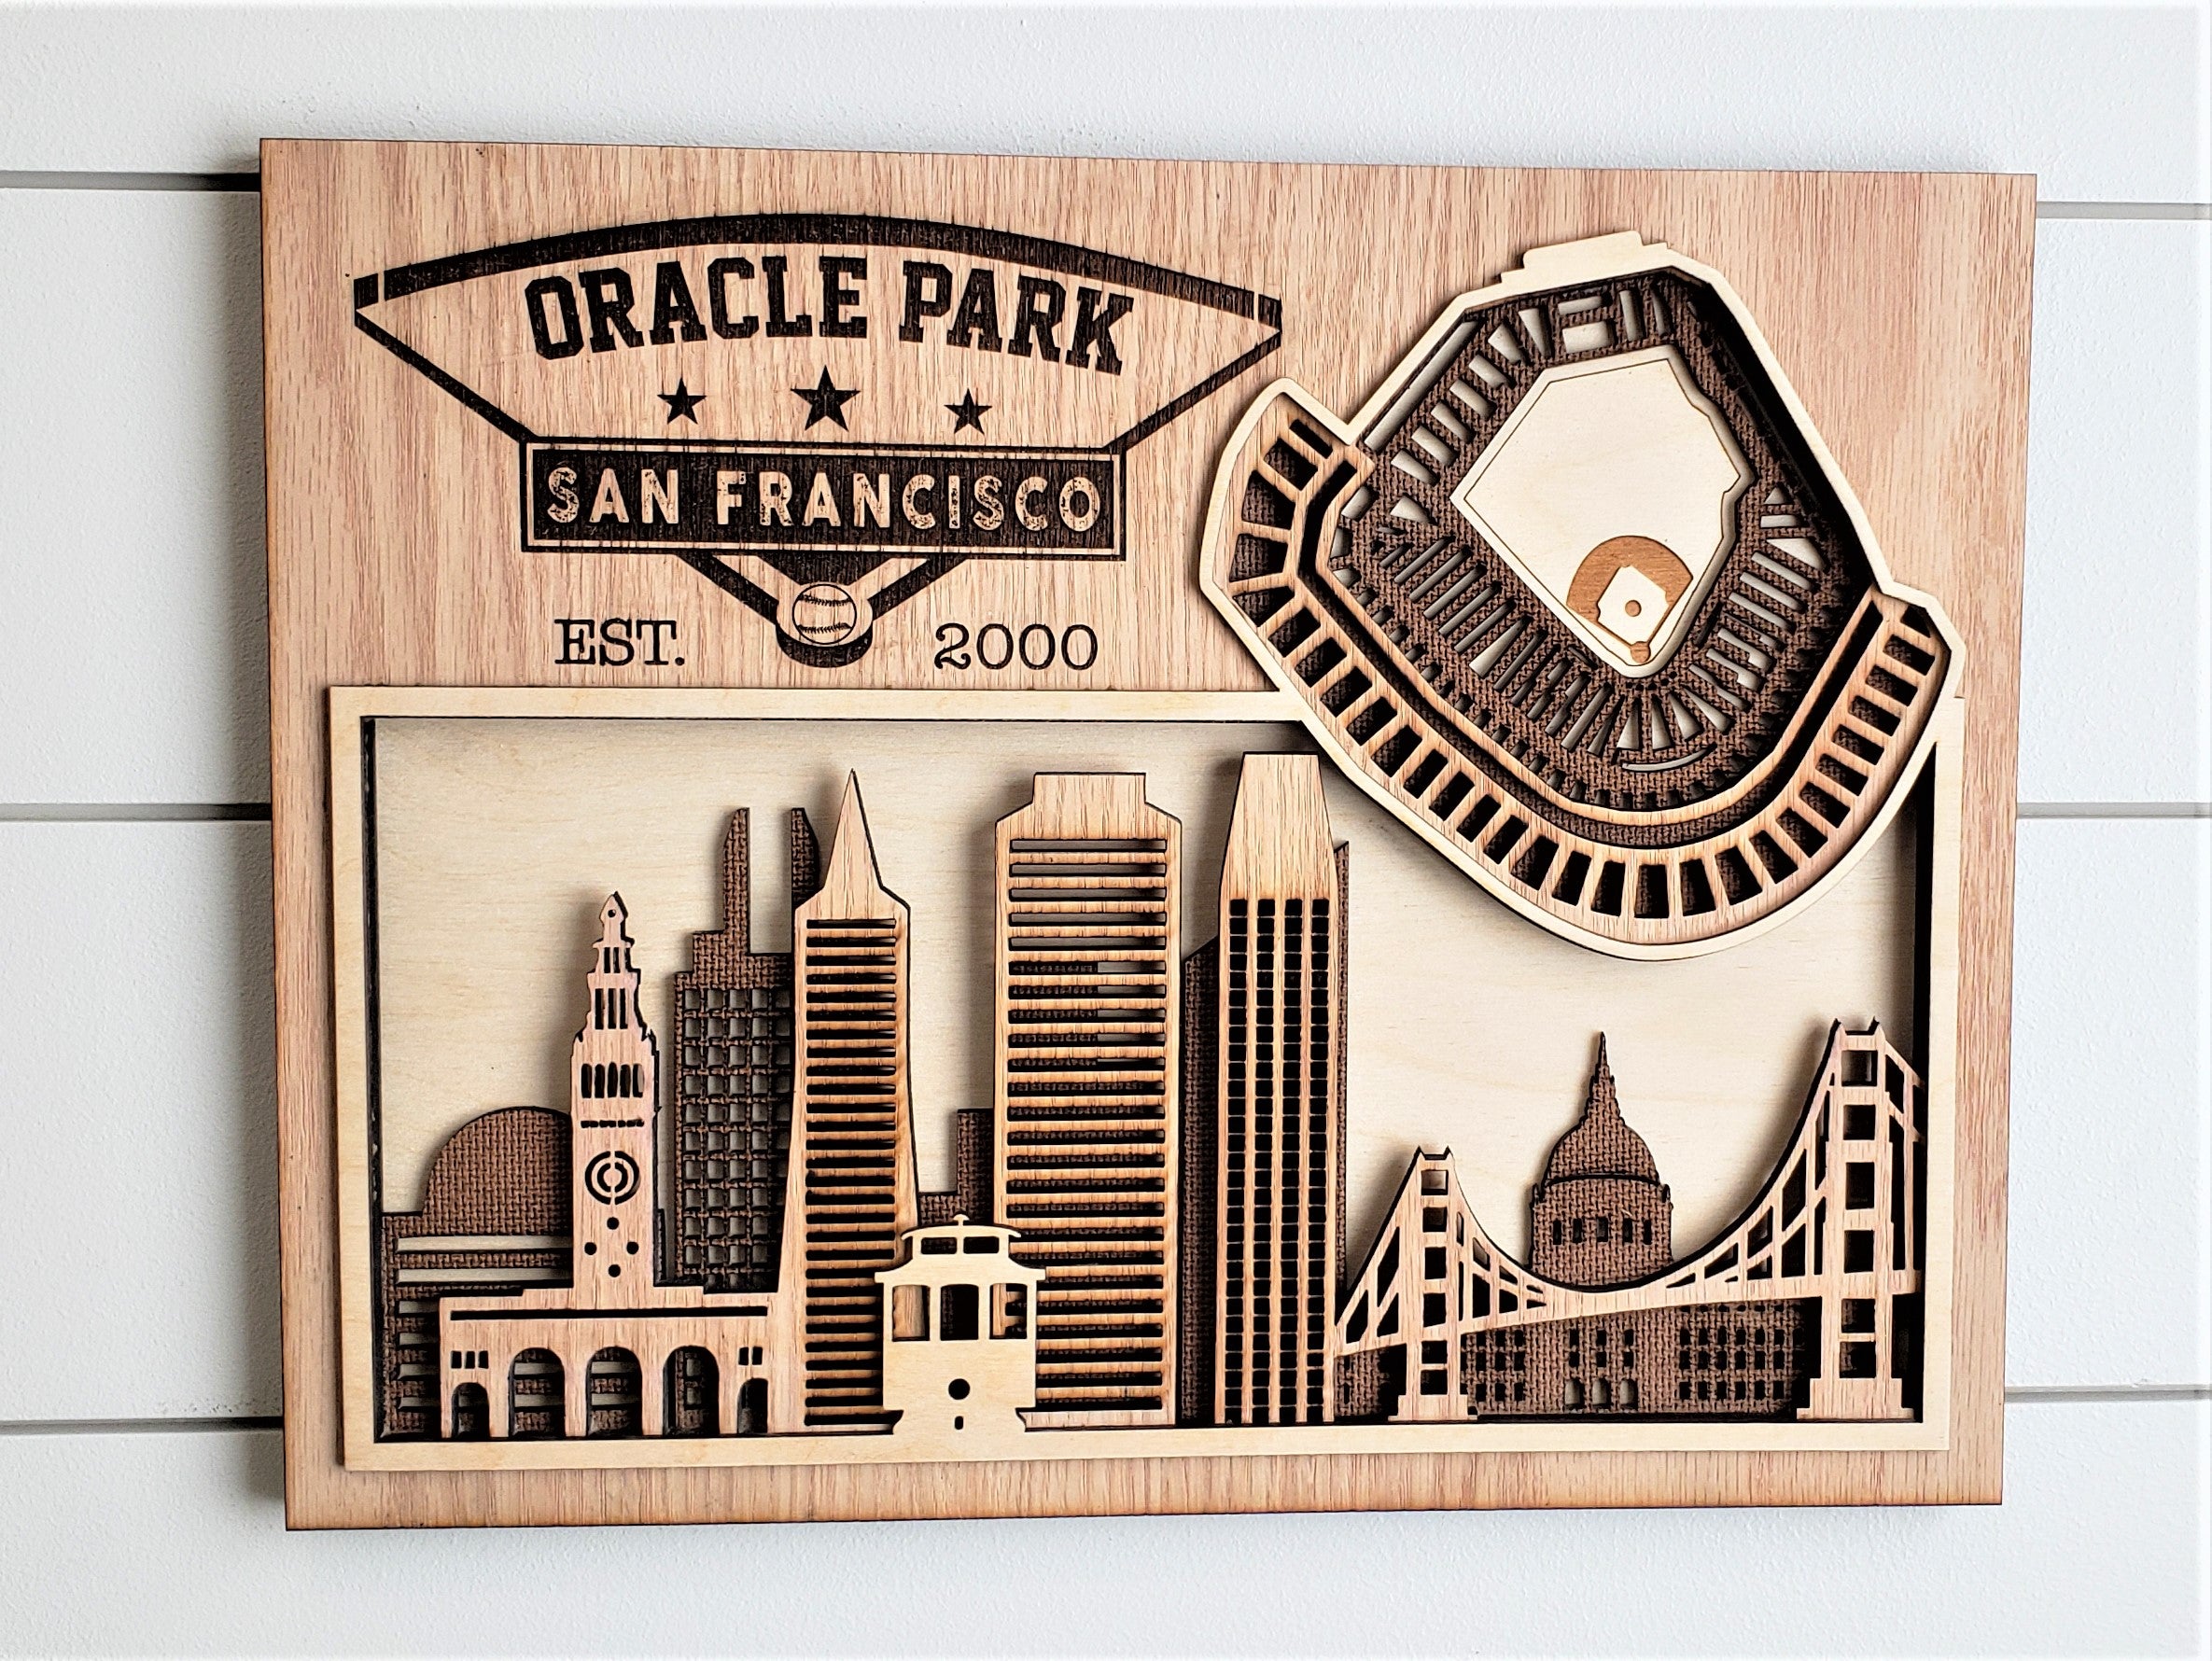 Oracle Park - Home of the San Francisco Giants